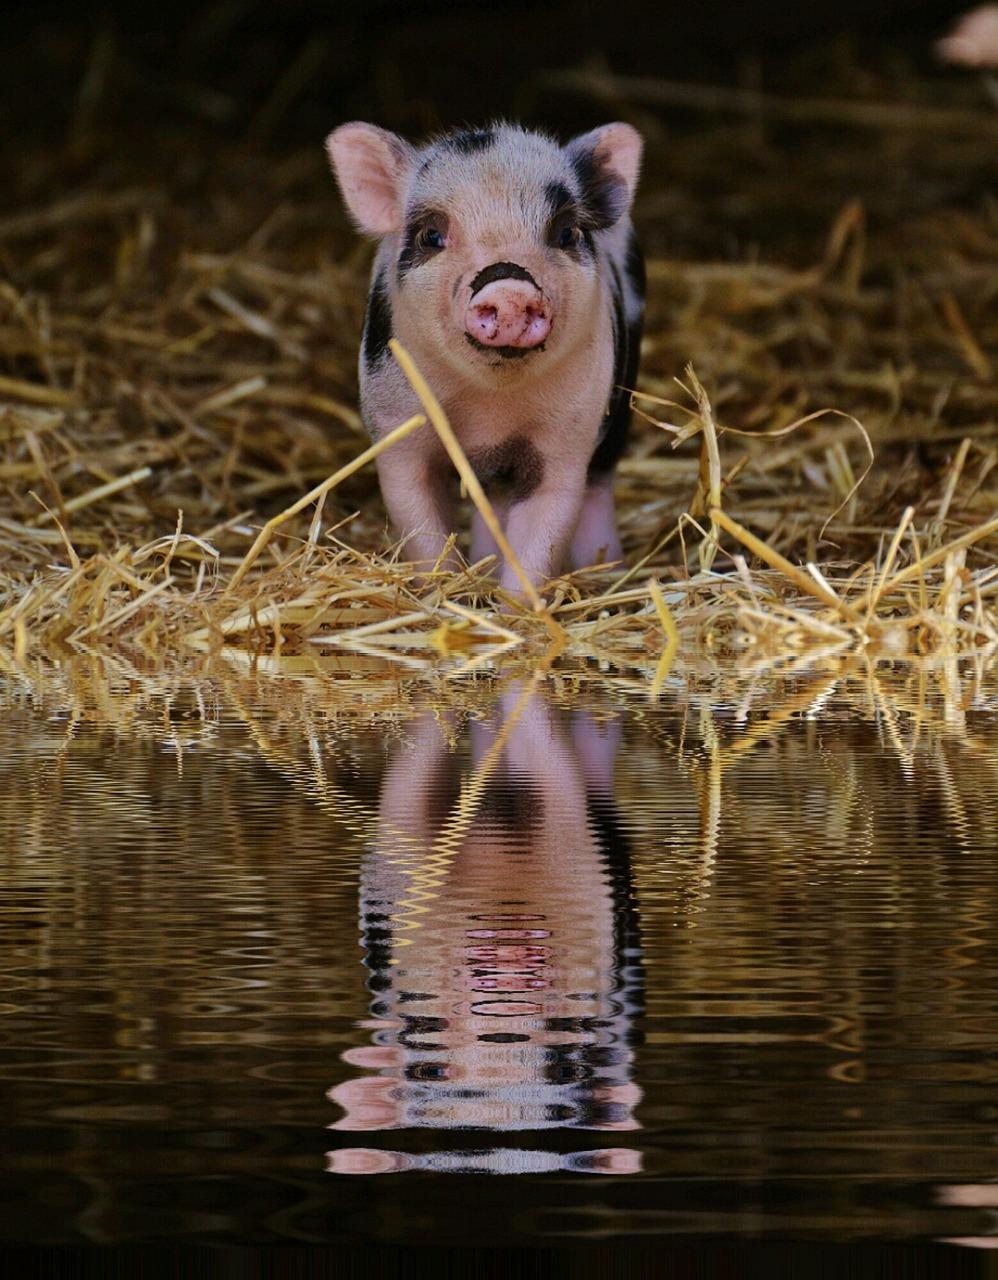 Tips for Proper Hydration and Water Management in Piglets